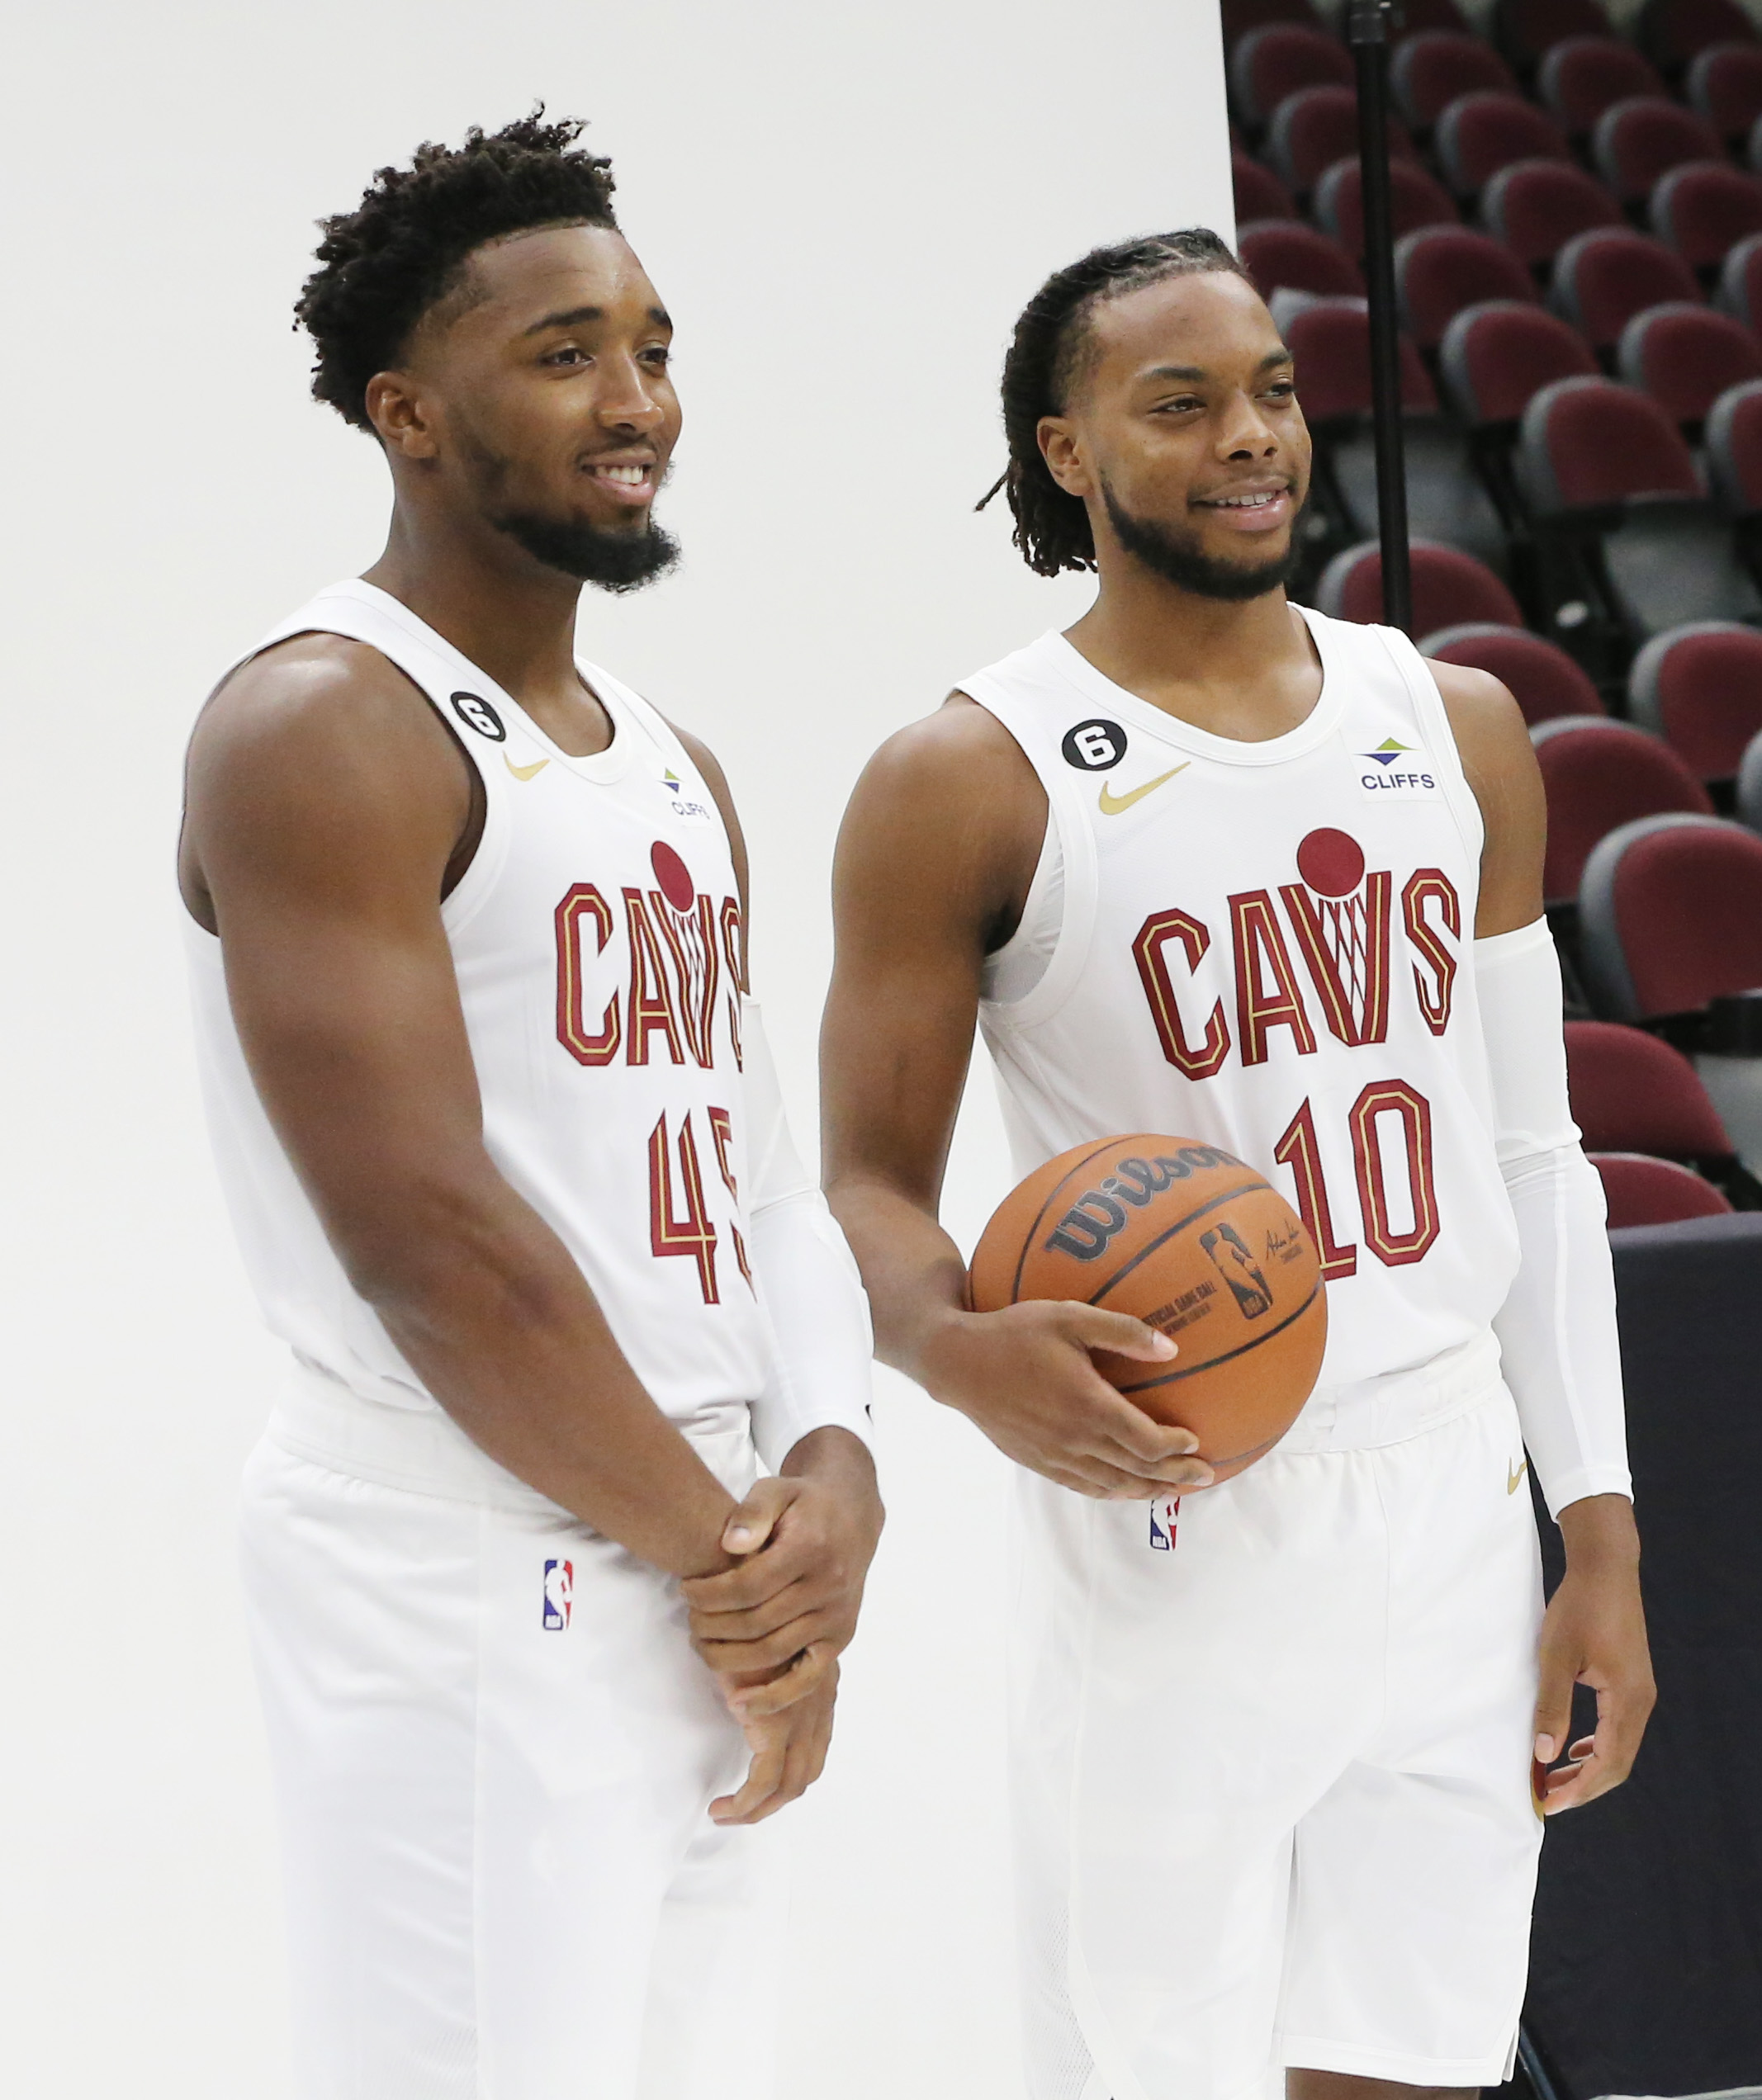 Media Day for the Cleveland Cavaliers, September 26, 2022